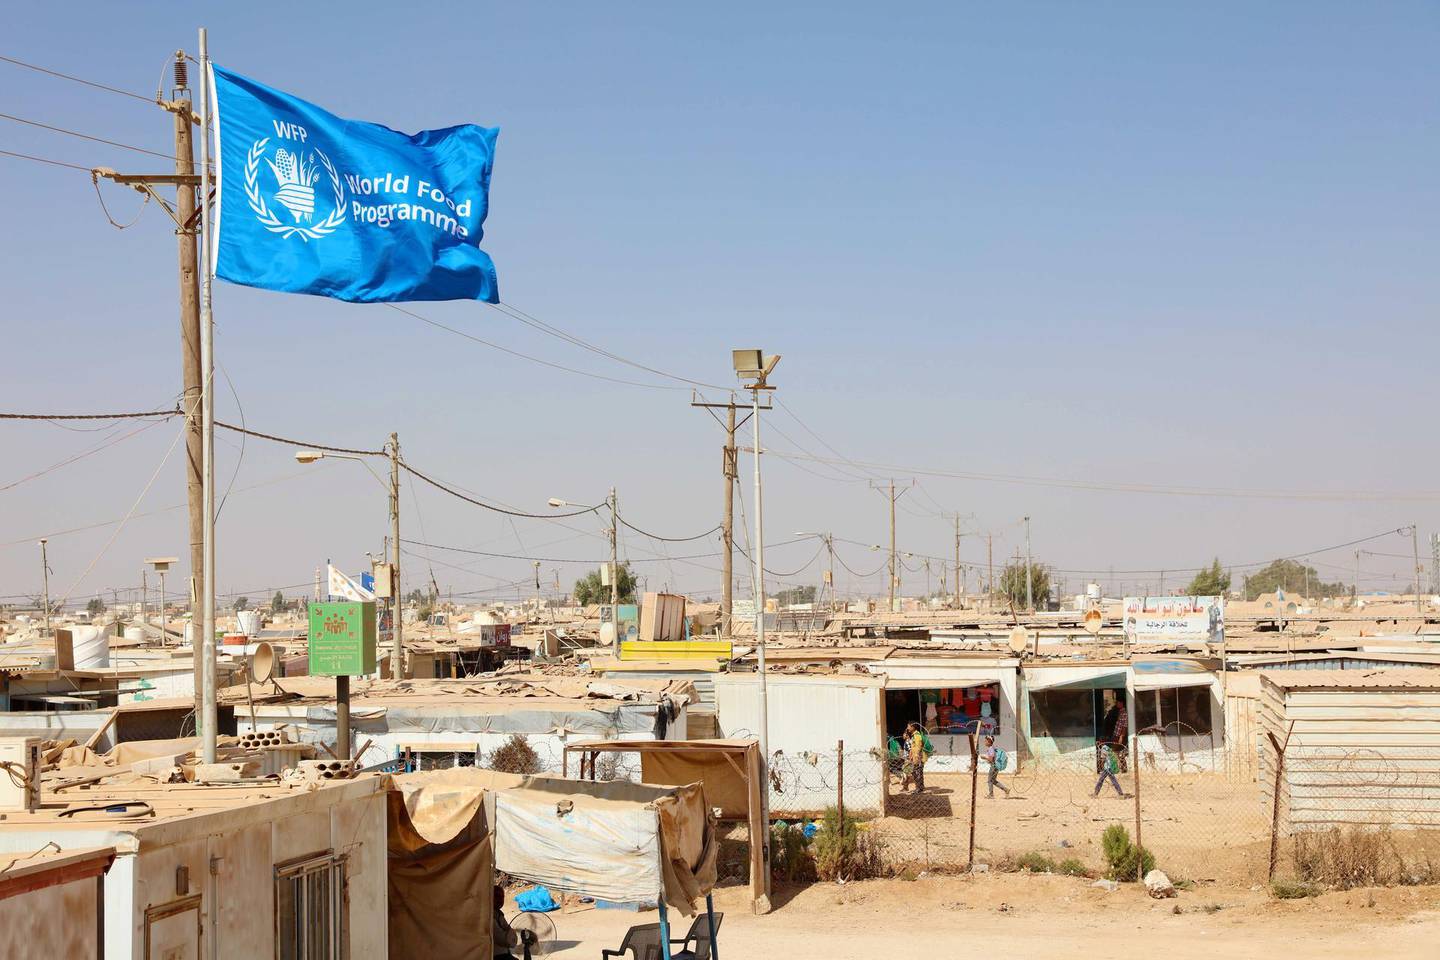 Zaatari refugee camp in Jordan, where the World Food Programme provides food assistance to all 80,000 residents. Courtesy WFP / Mohammad Batah